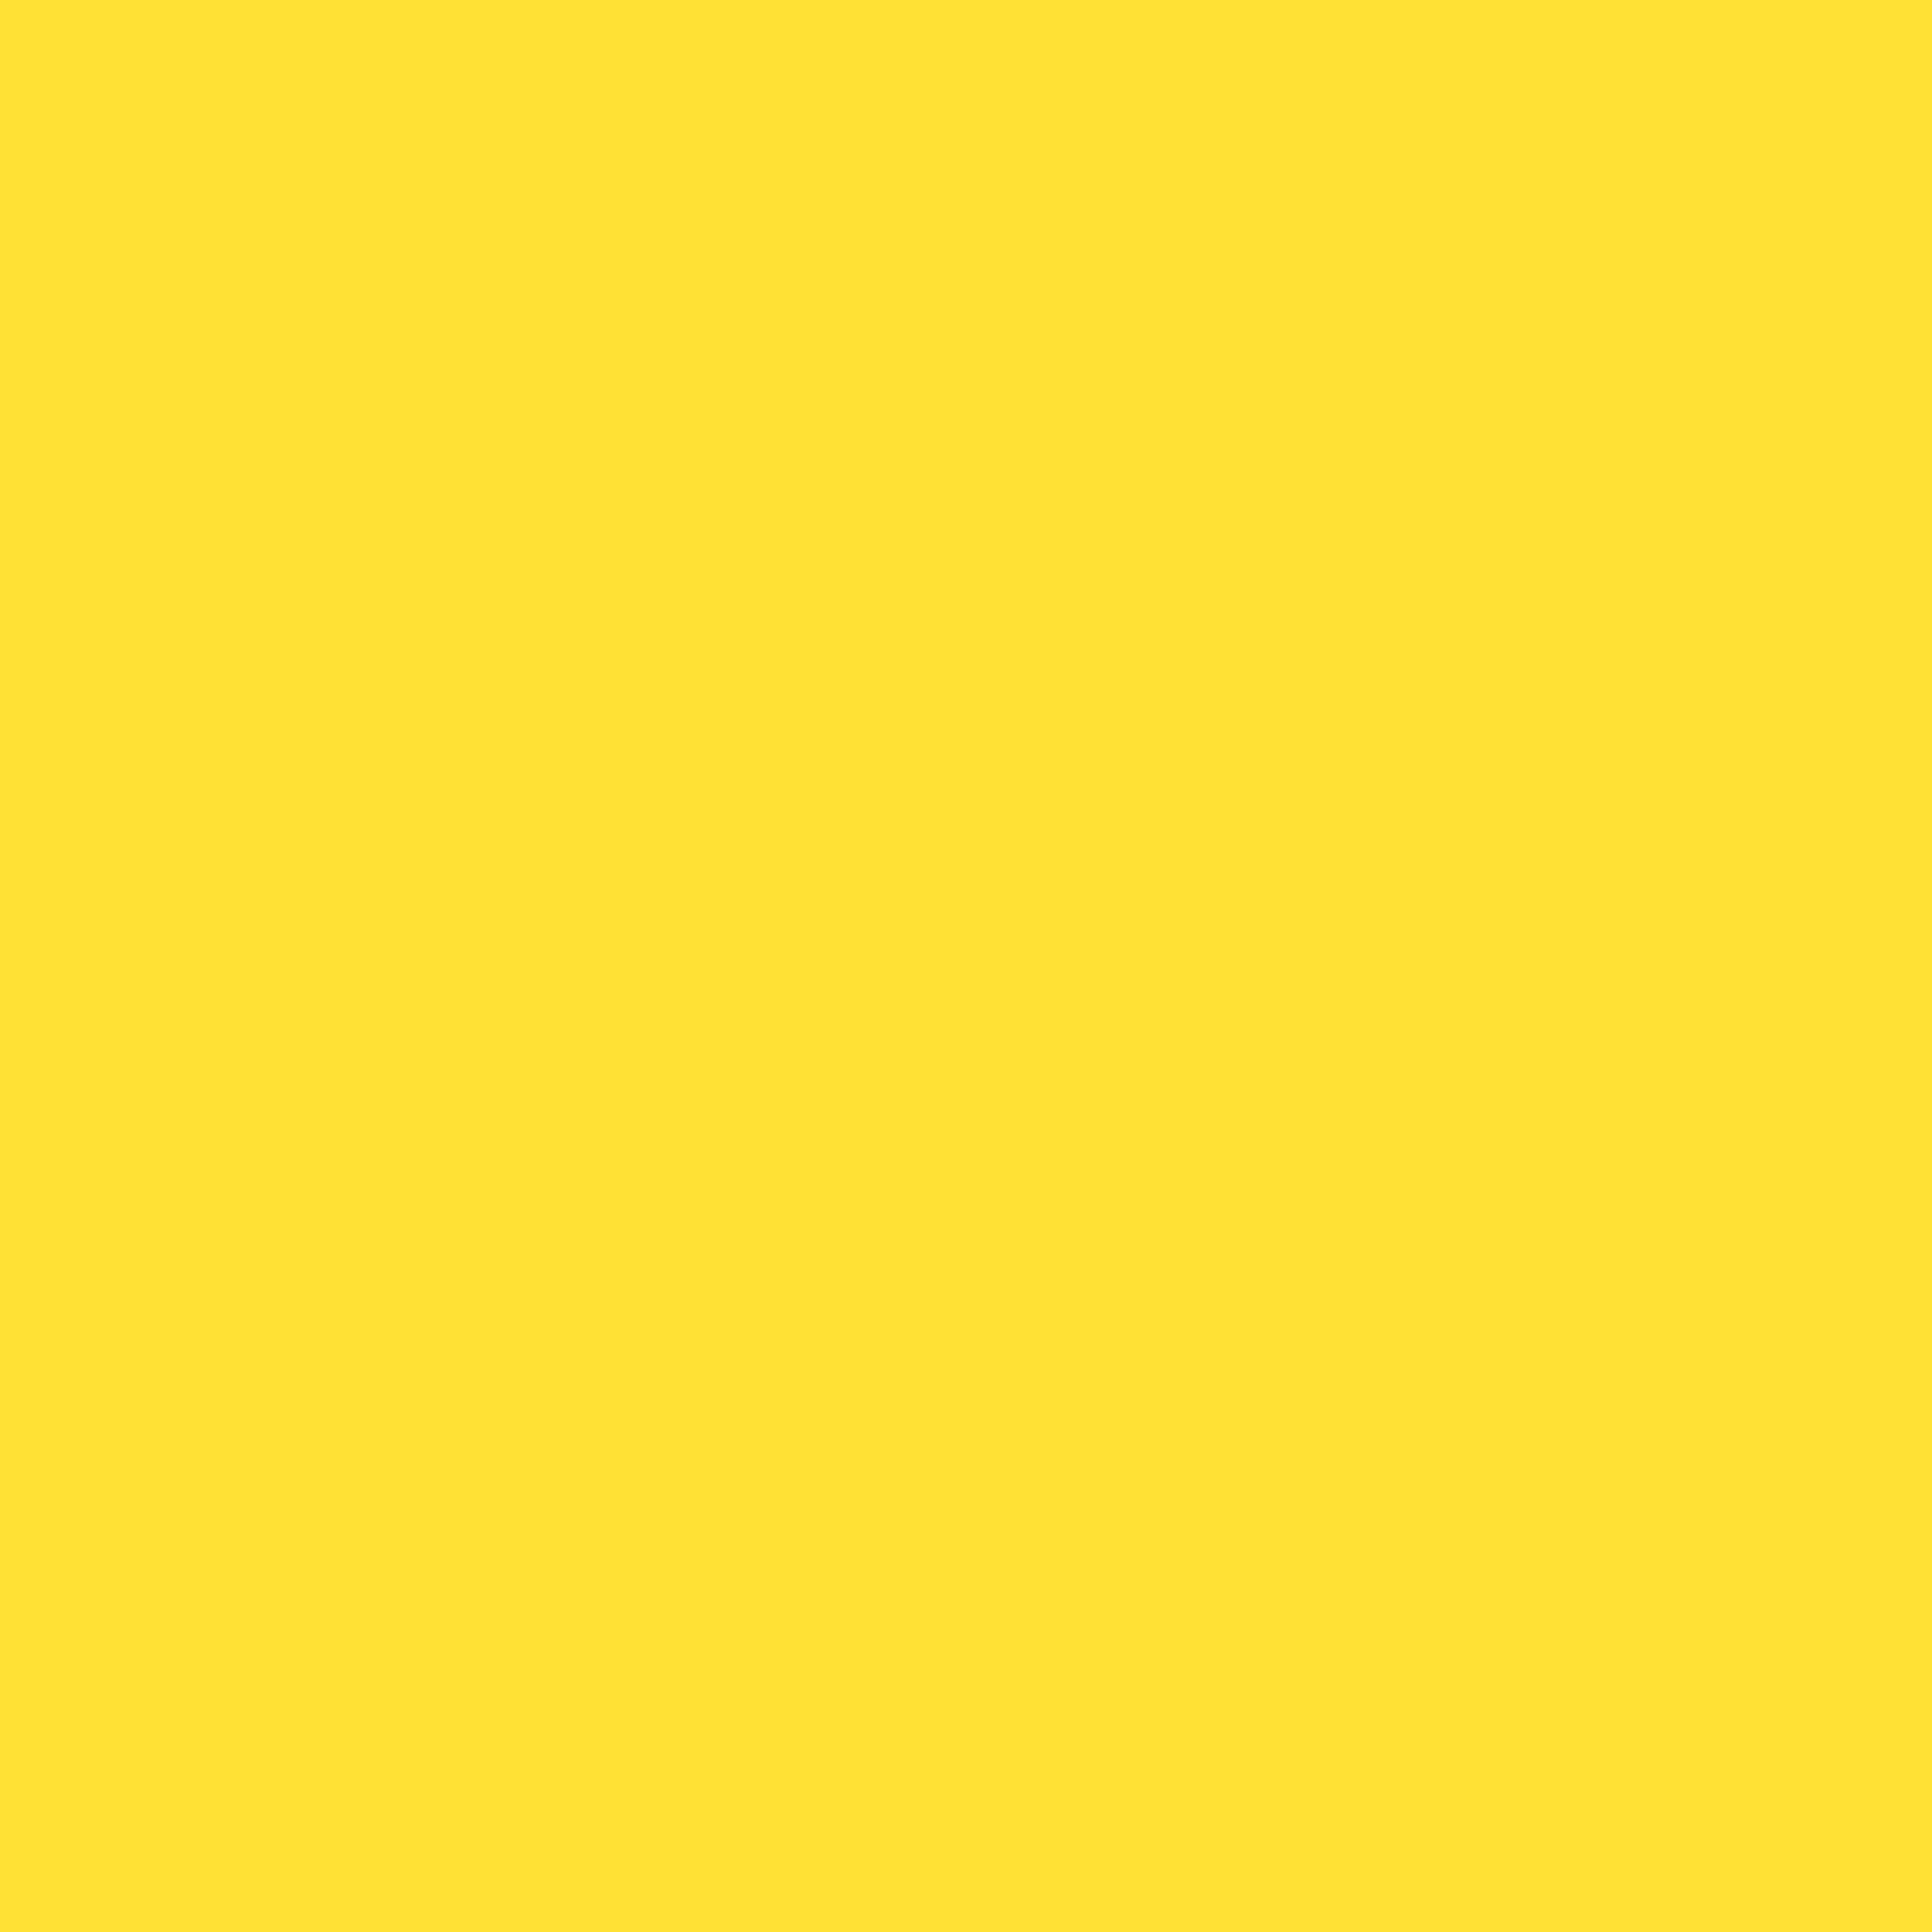 2048x2048 Banana Yellow Solid Color Background